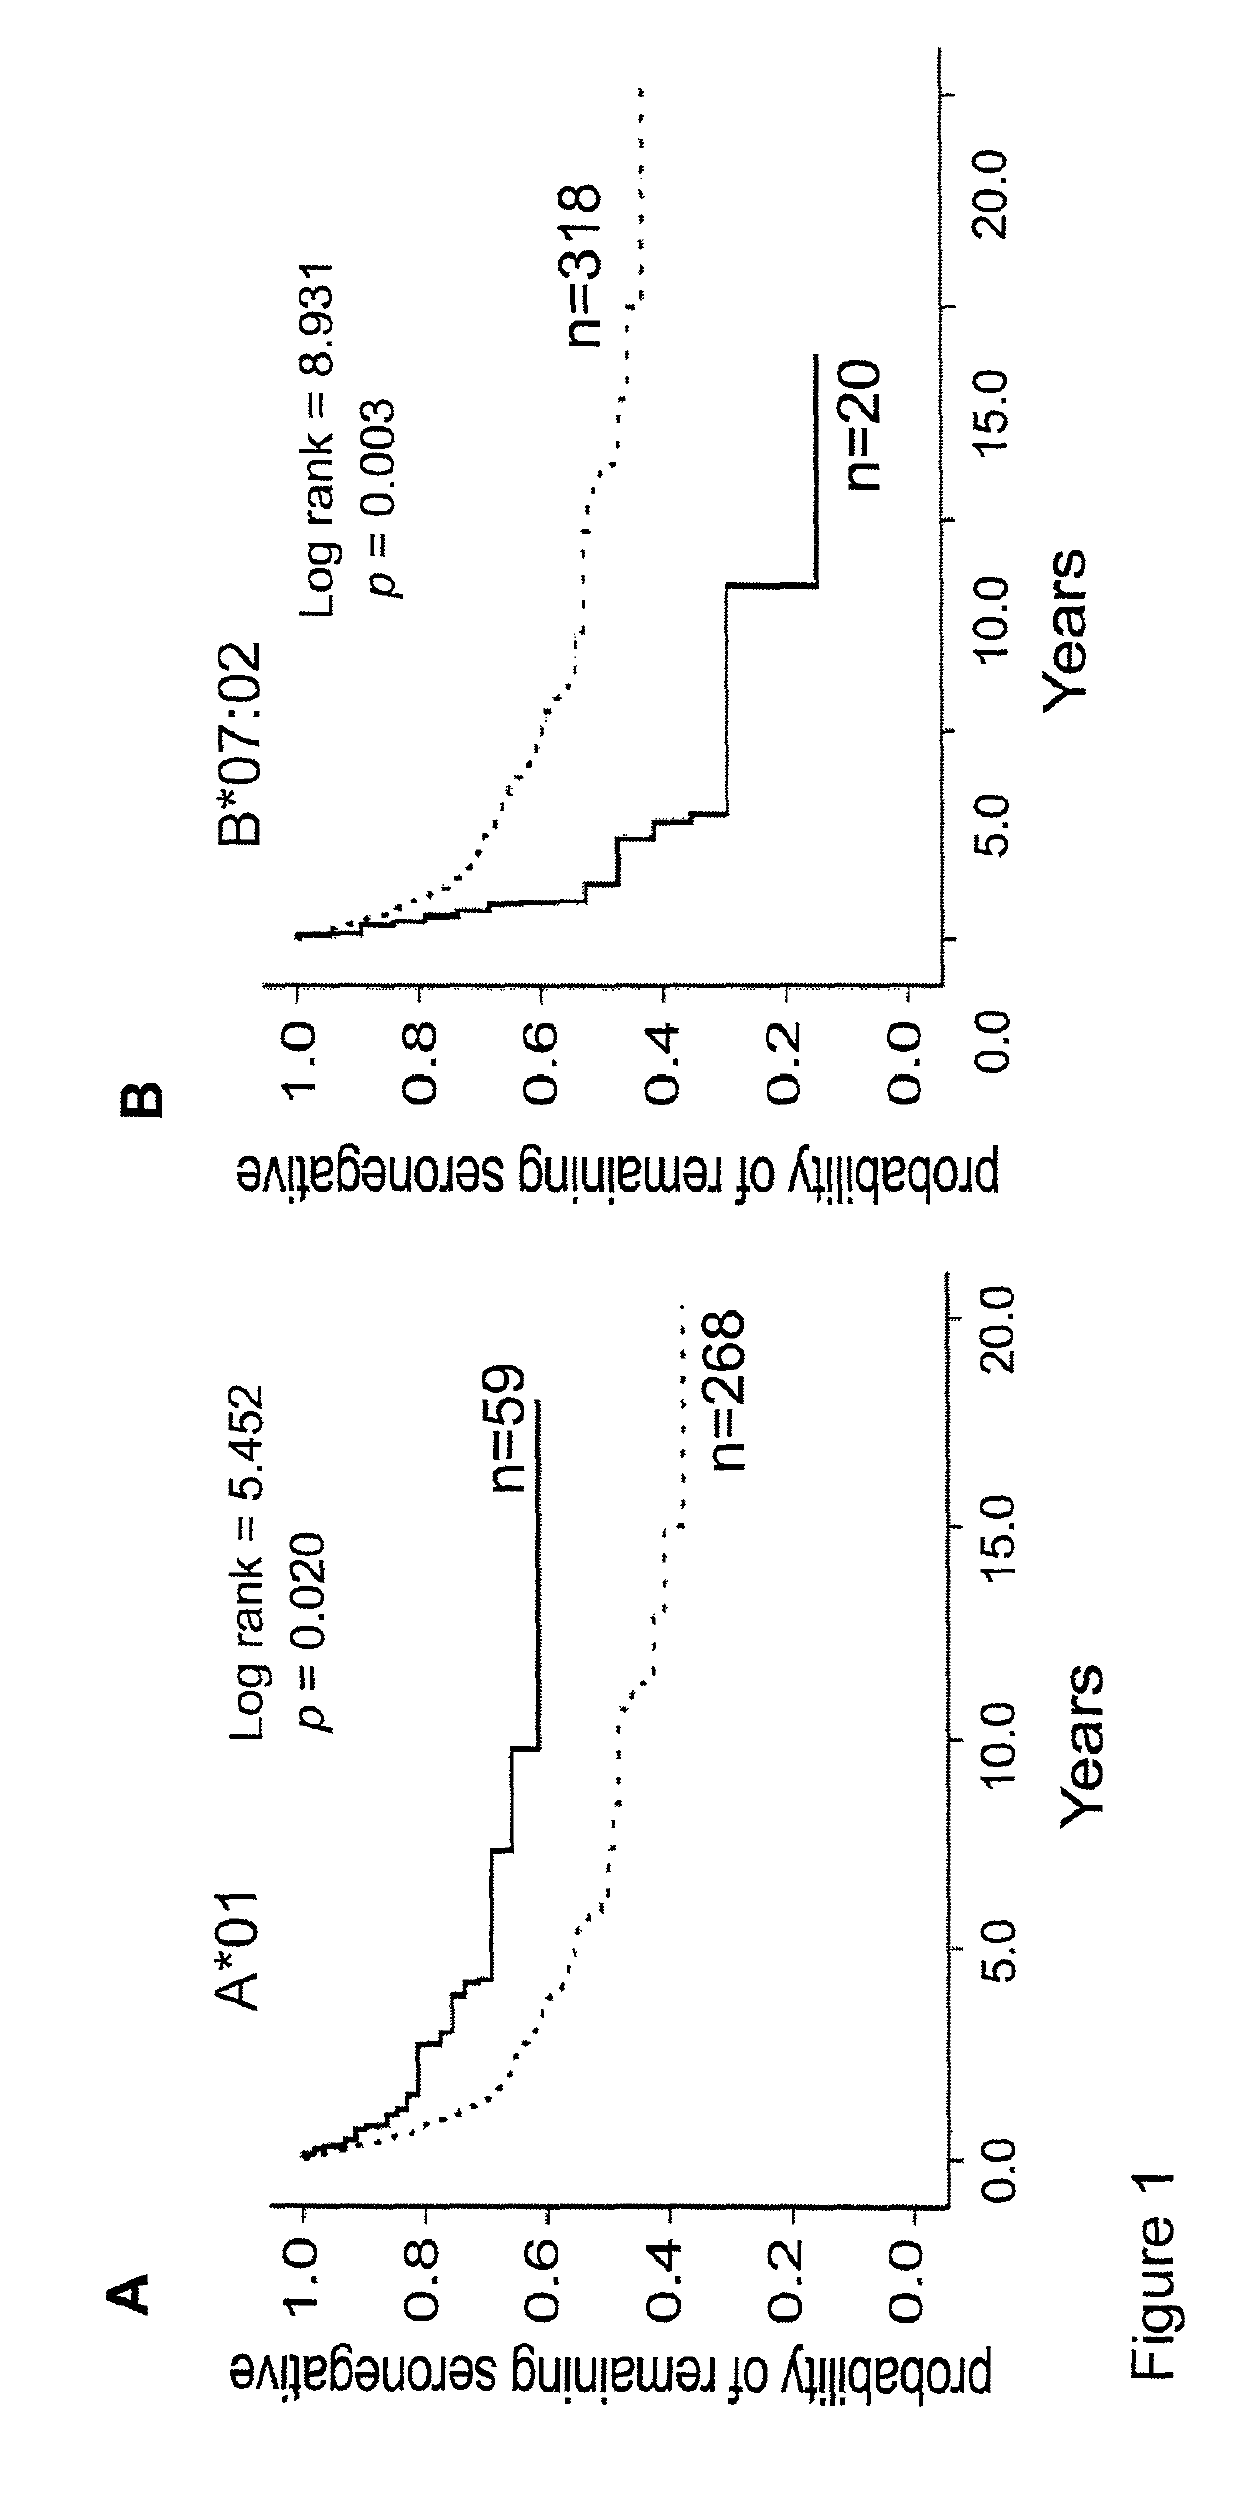 Methods of inducing an immune response against HIV by administering immunogenic peptides obtained from protease cleavage sites